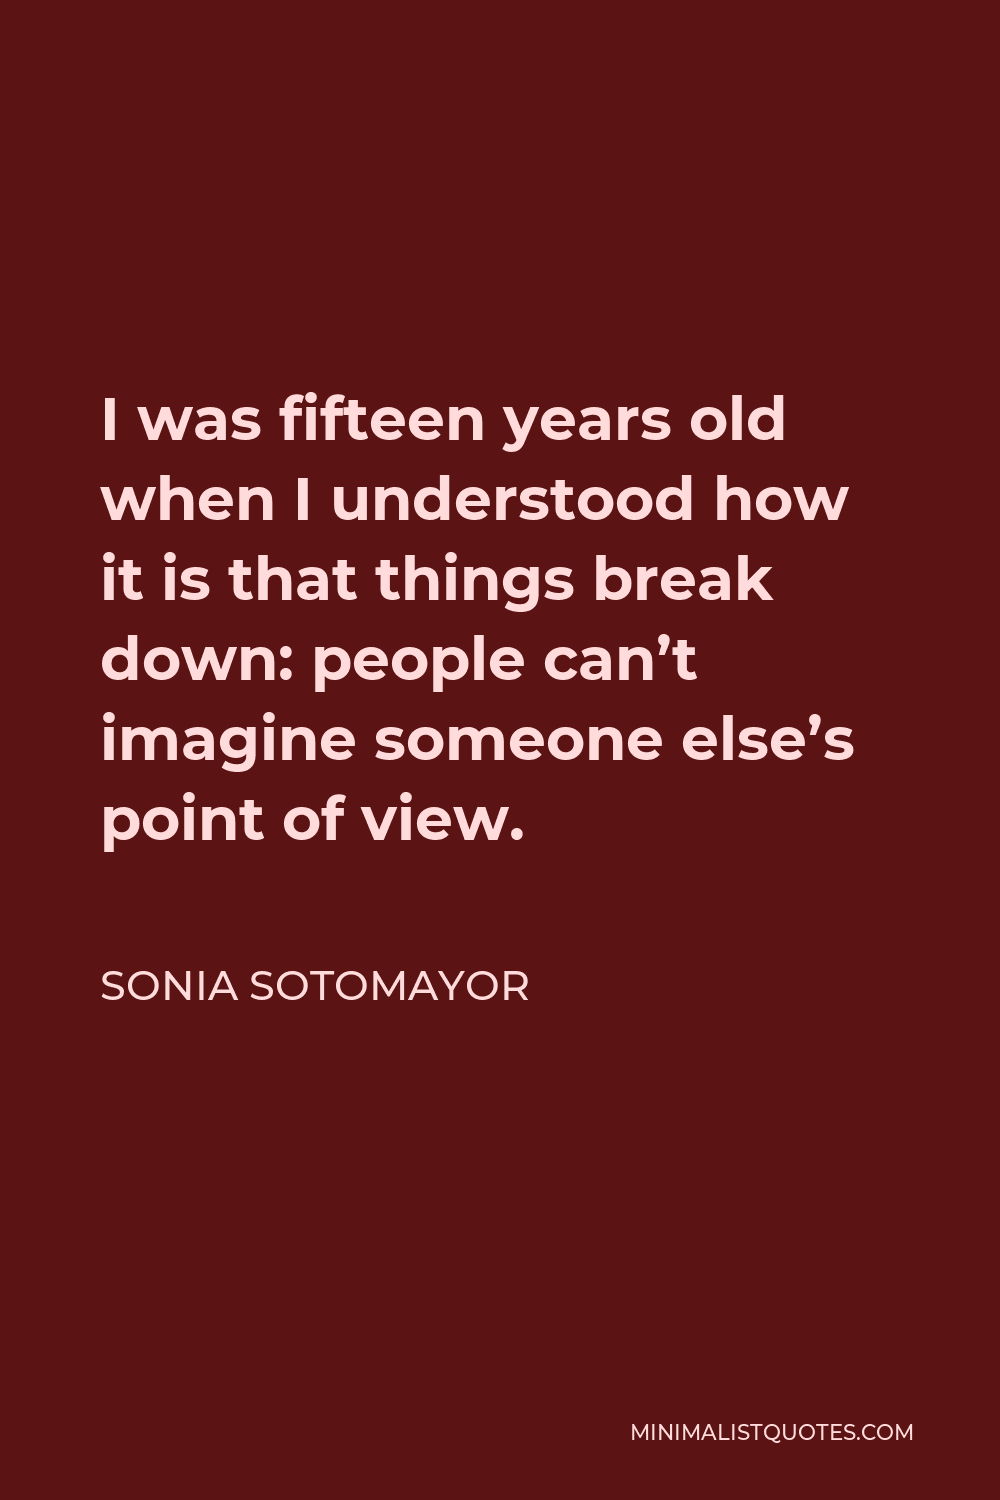 Sonia Sotomayor Quote - I was fifteen years old when I understood how it is that things break down: people can’t imagine someone else’s point of view.